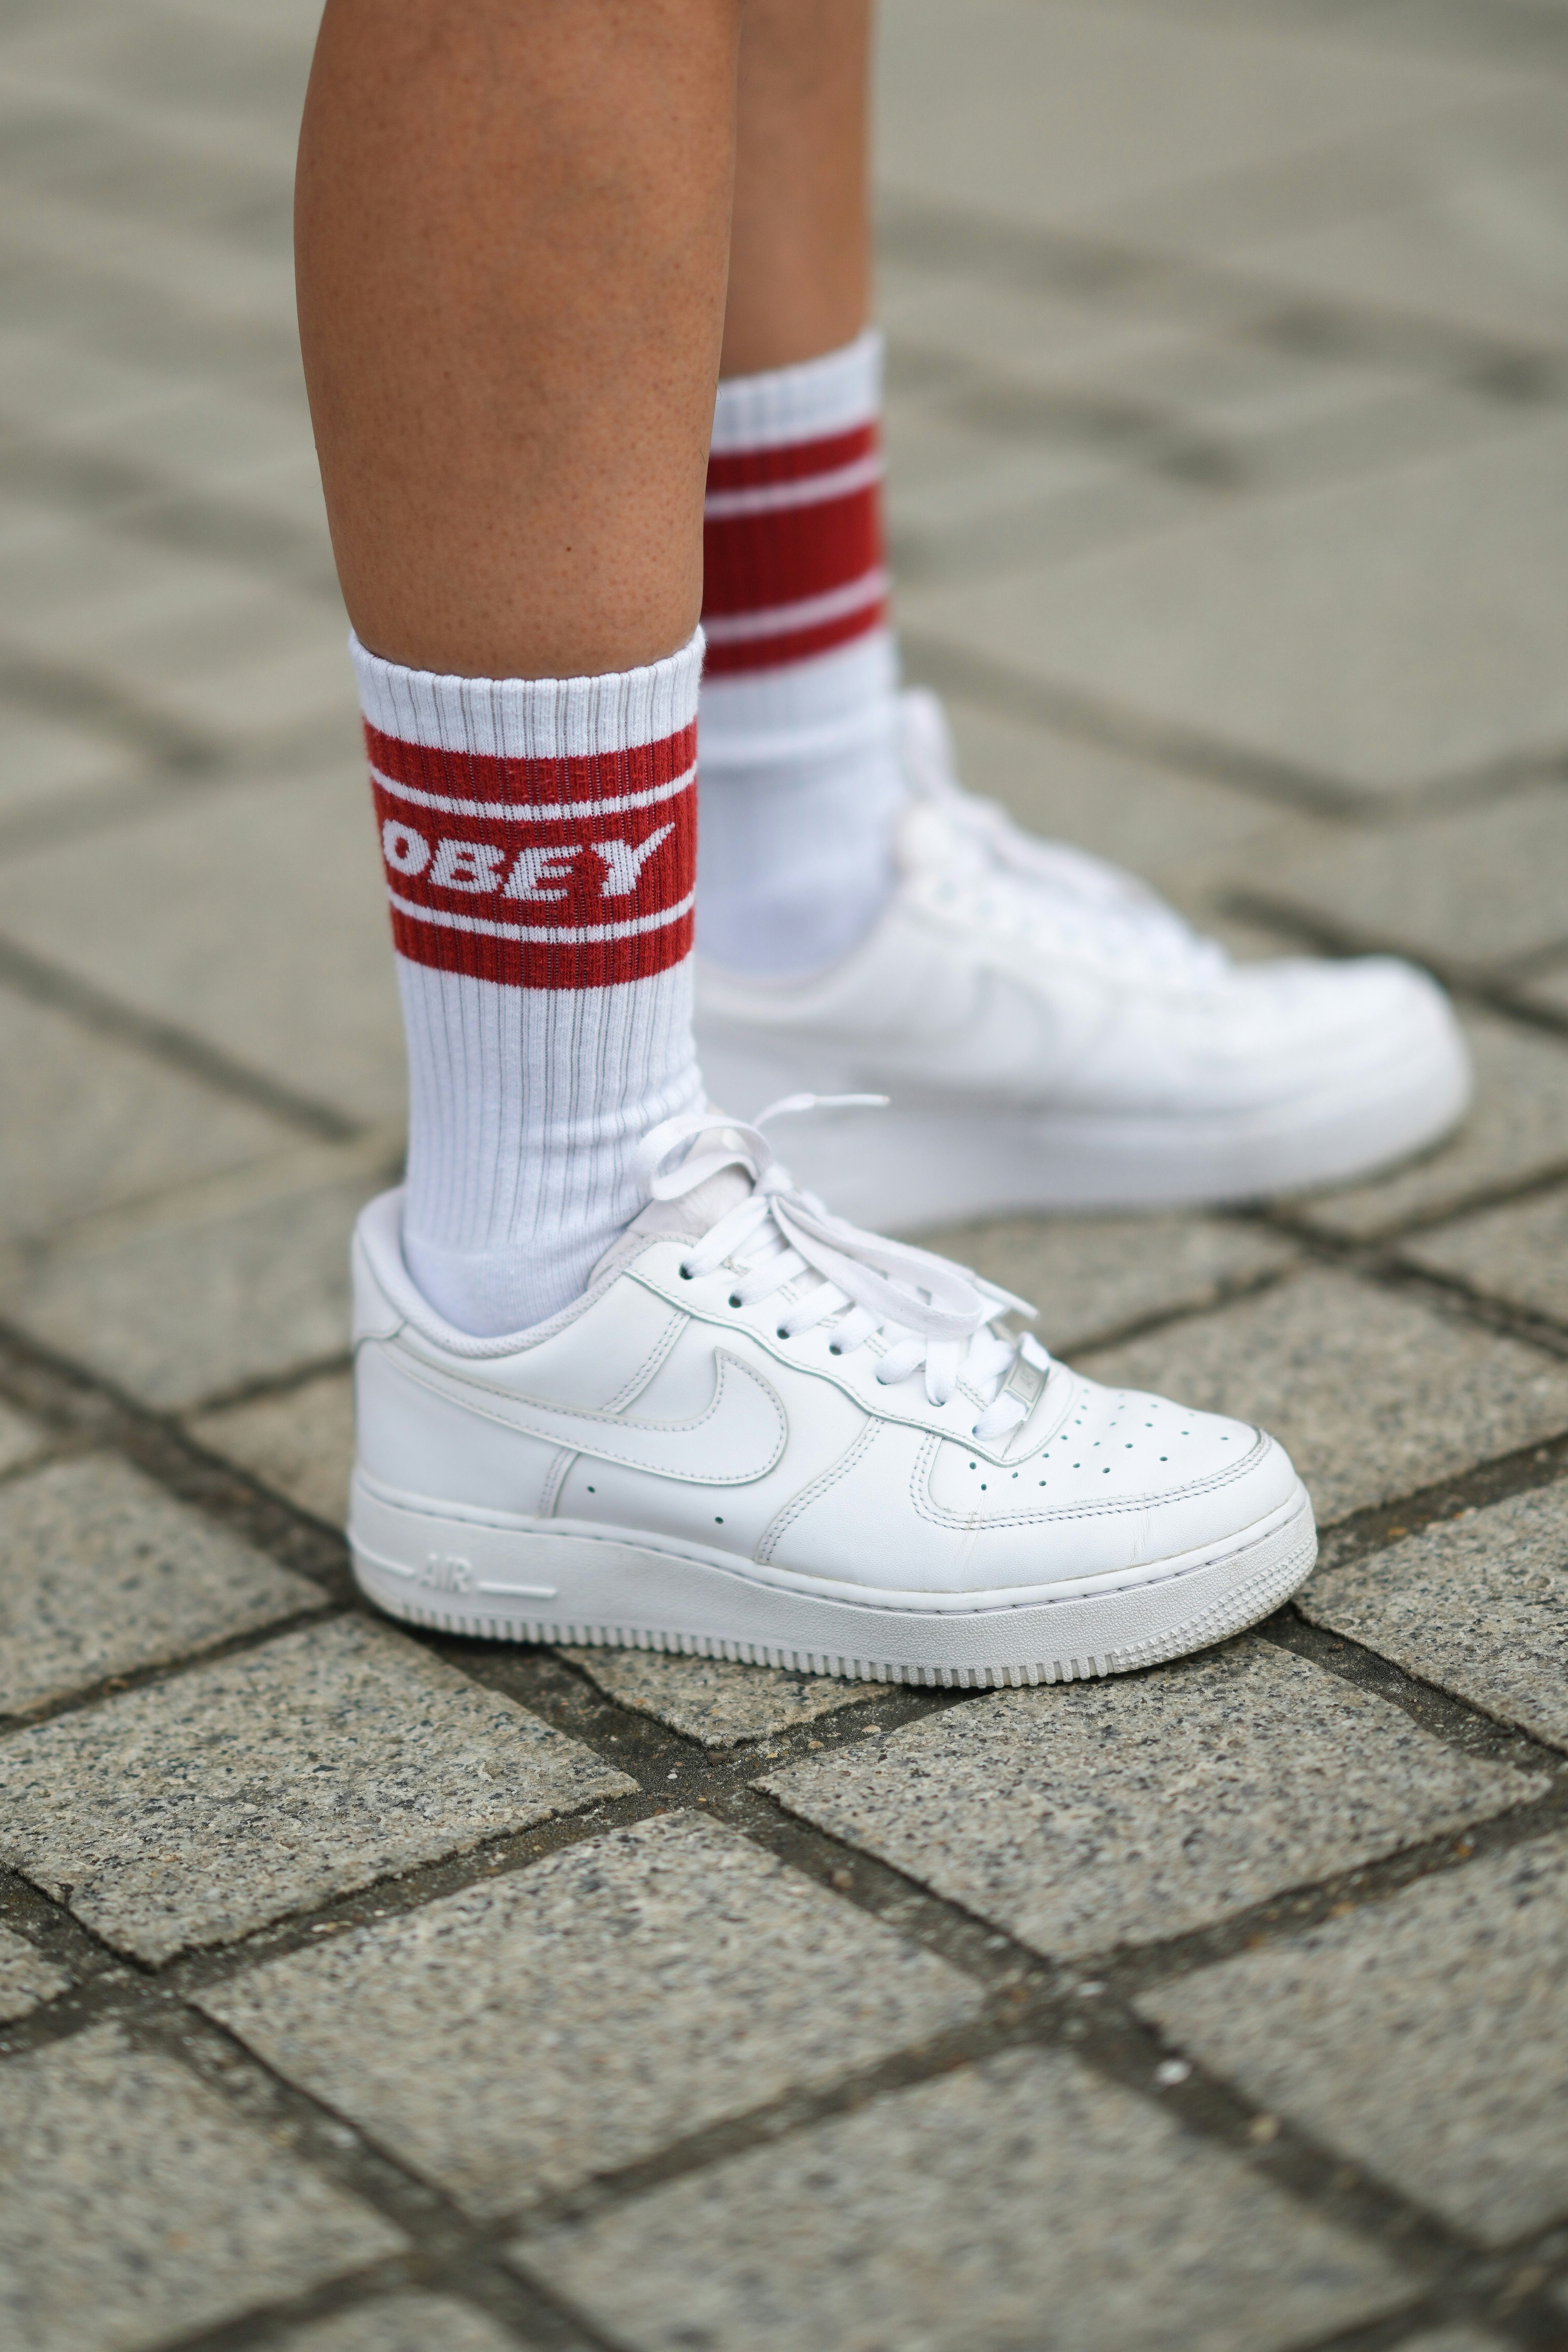 socks to wear with air force 1s